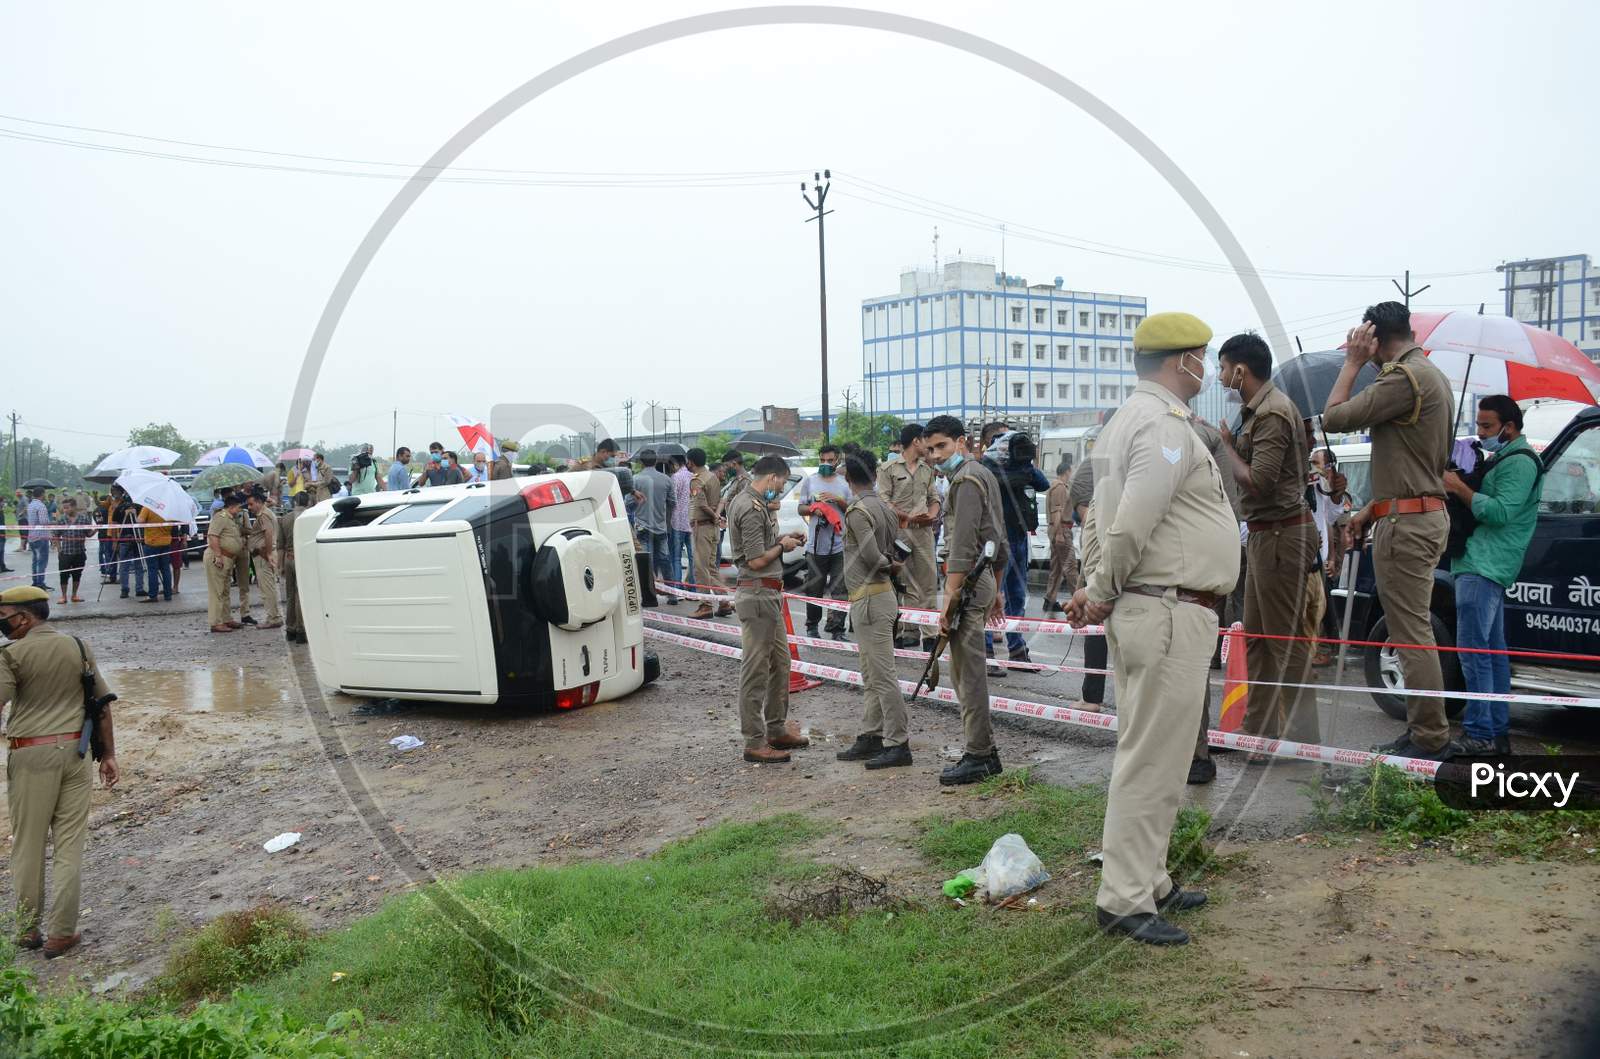 Police officials at the site of the encounter of gangster Vikas Dubey who was killed when he tried to escape from police custody in Kanpur, Uttar Pradesh on July 10, 2020